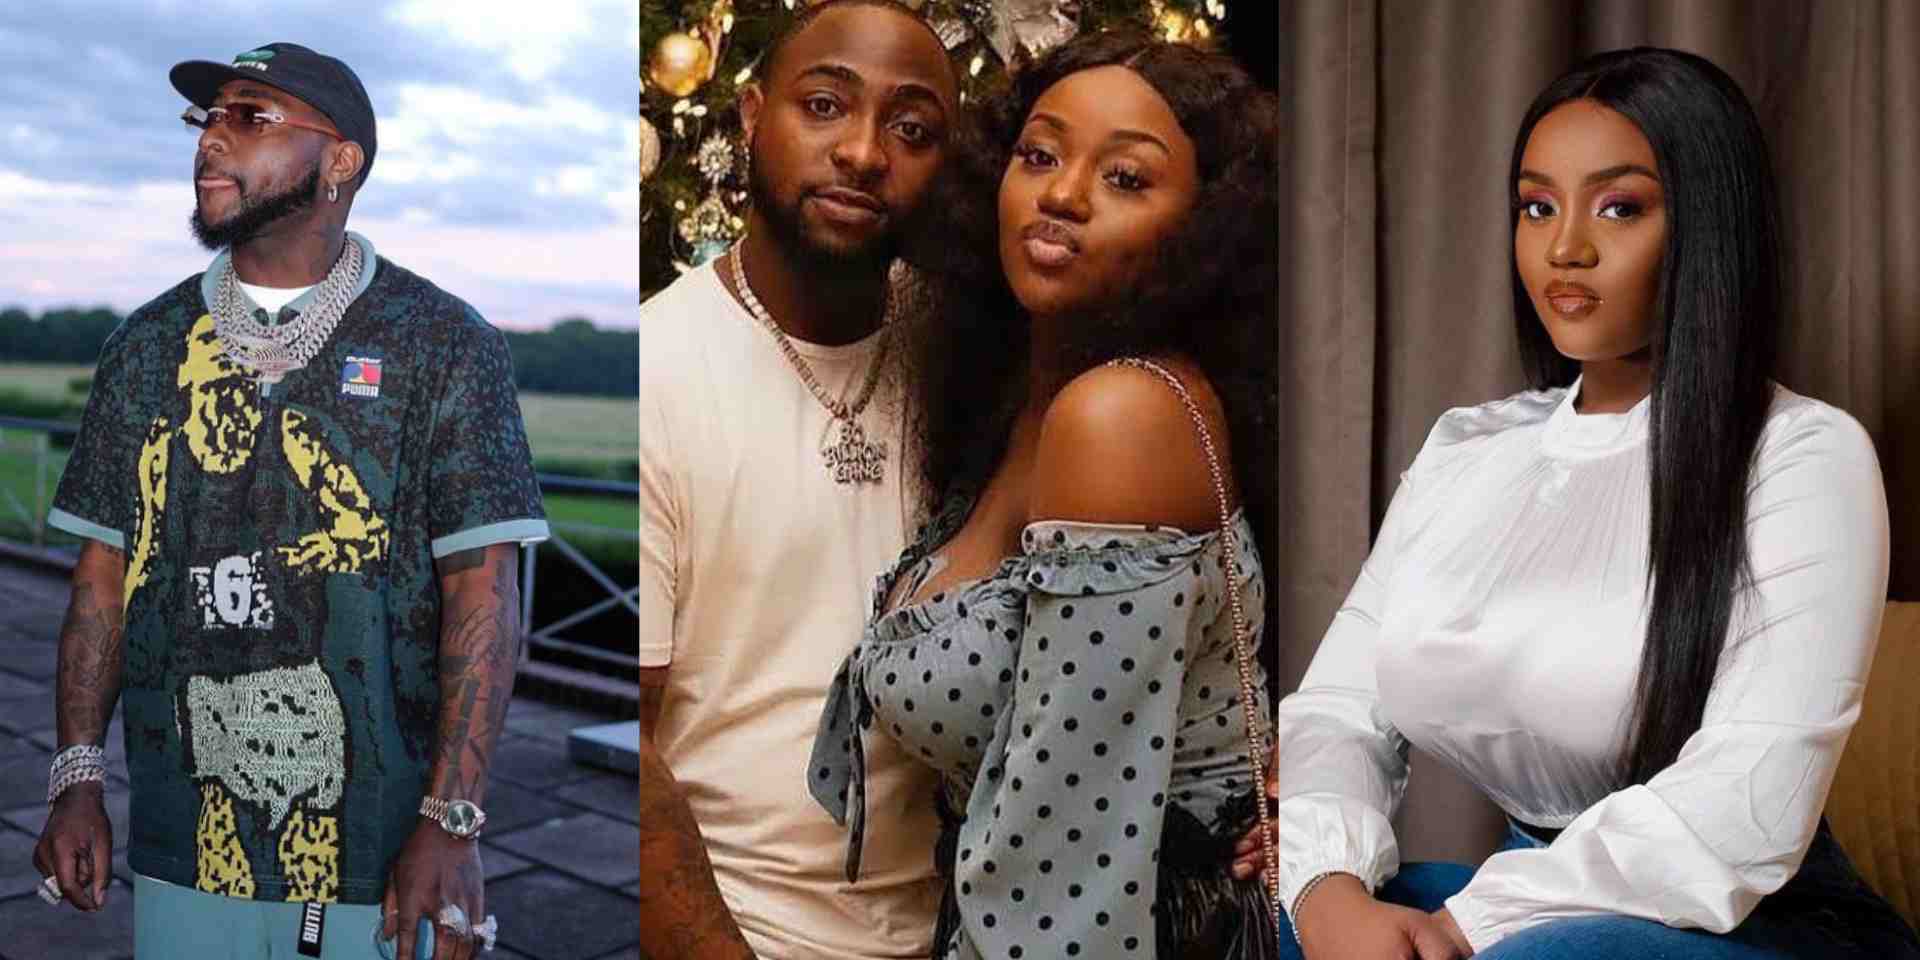 "Davido and Chioma are back together" - Davido's aide hints